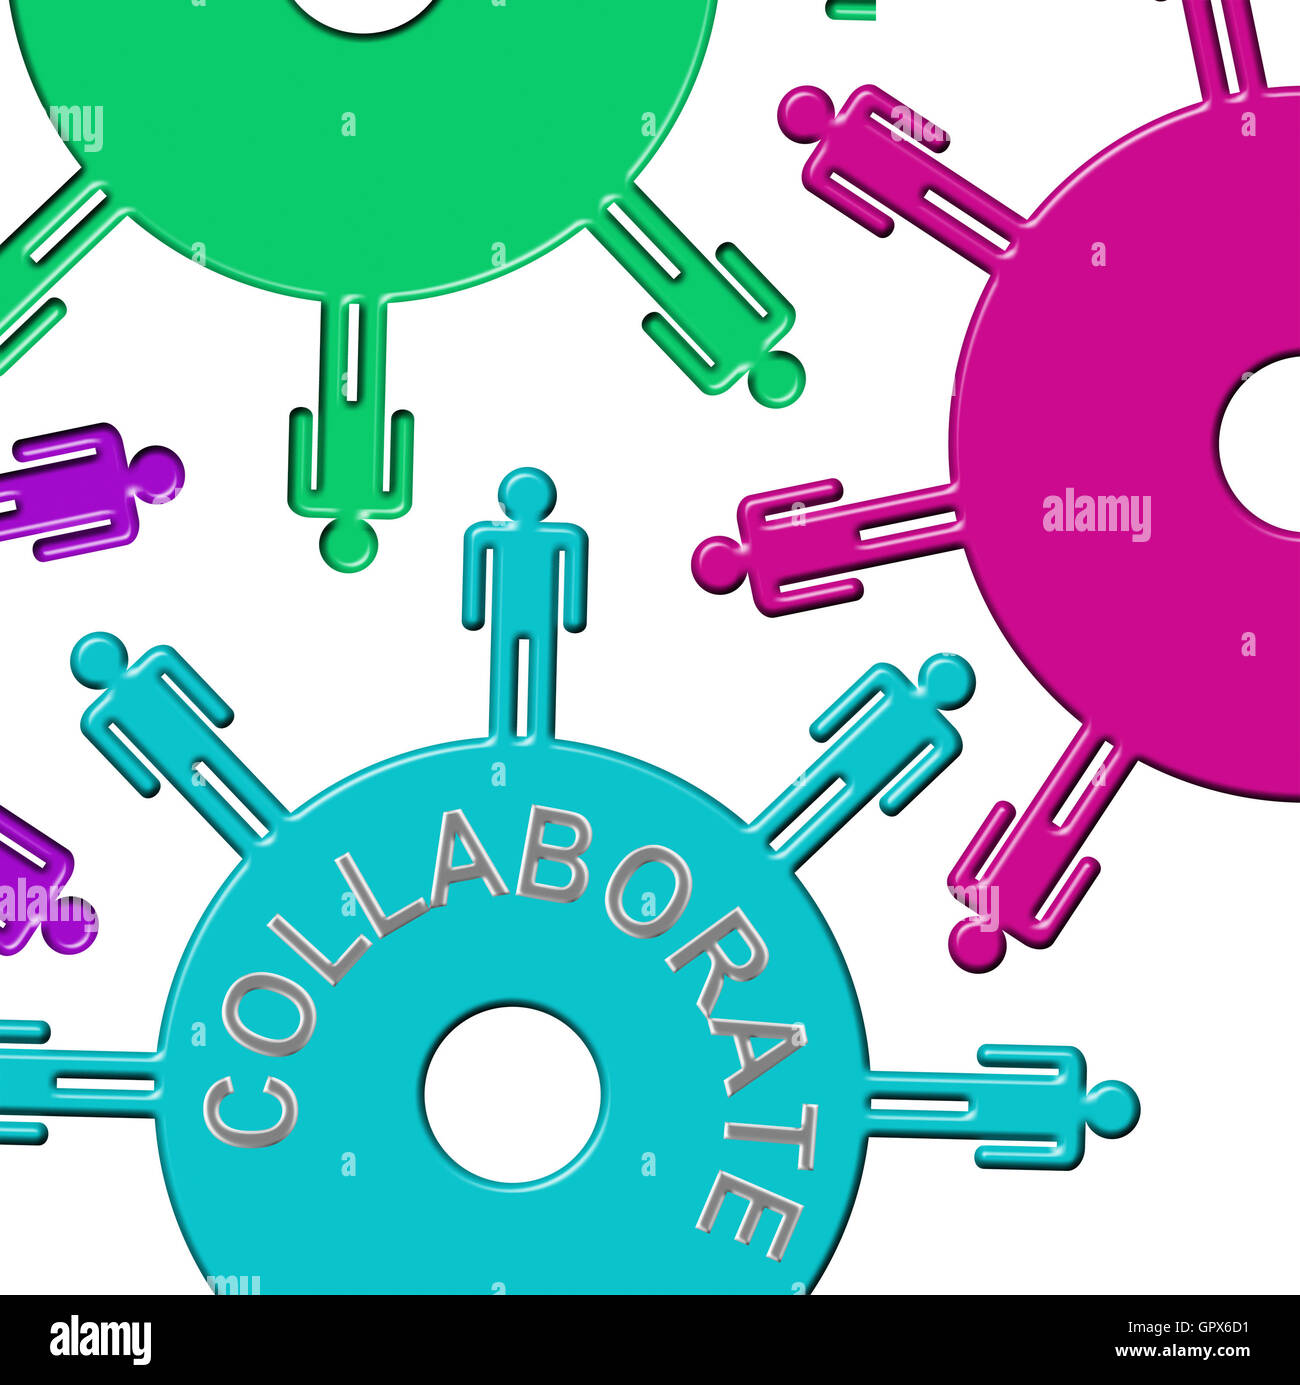 Collaborate Cogs Showing Working Together And Collaborates Stock Photo